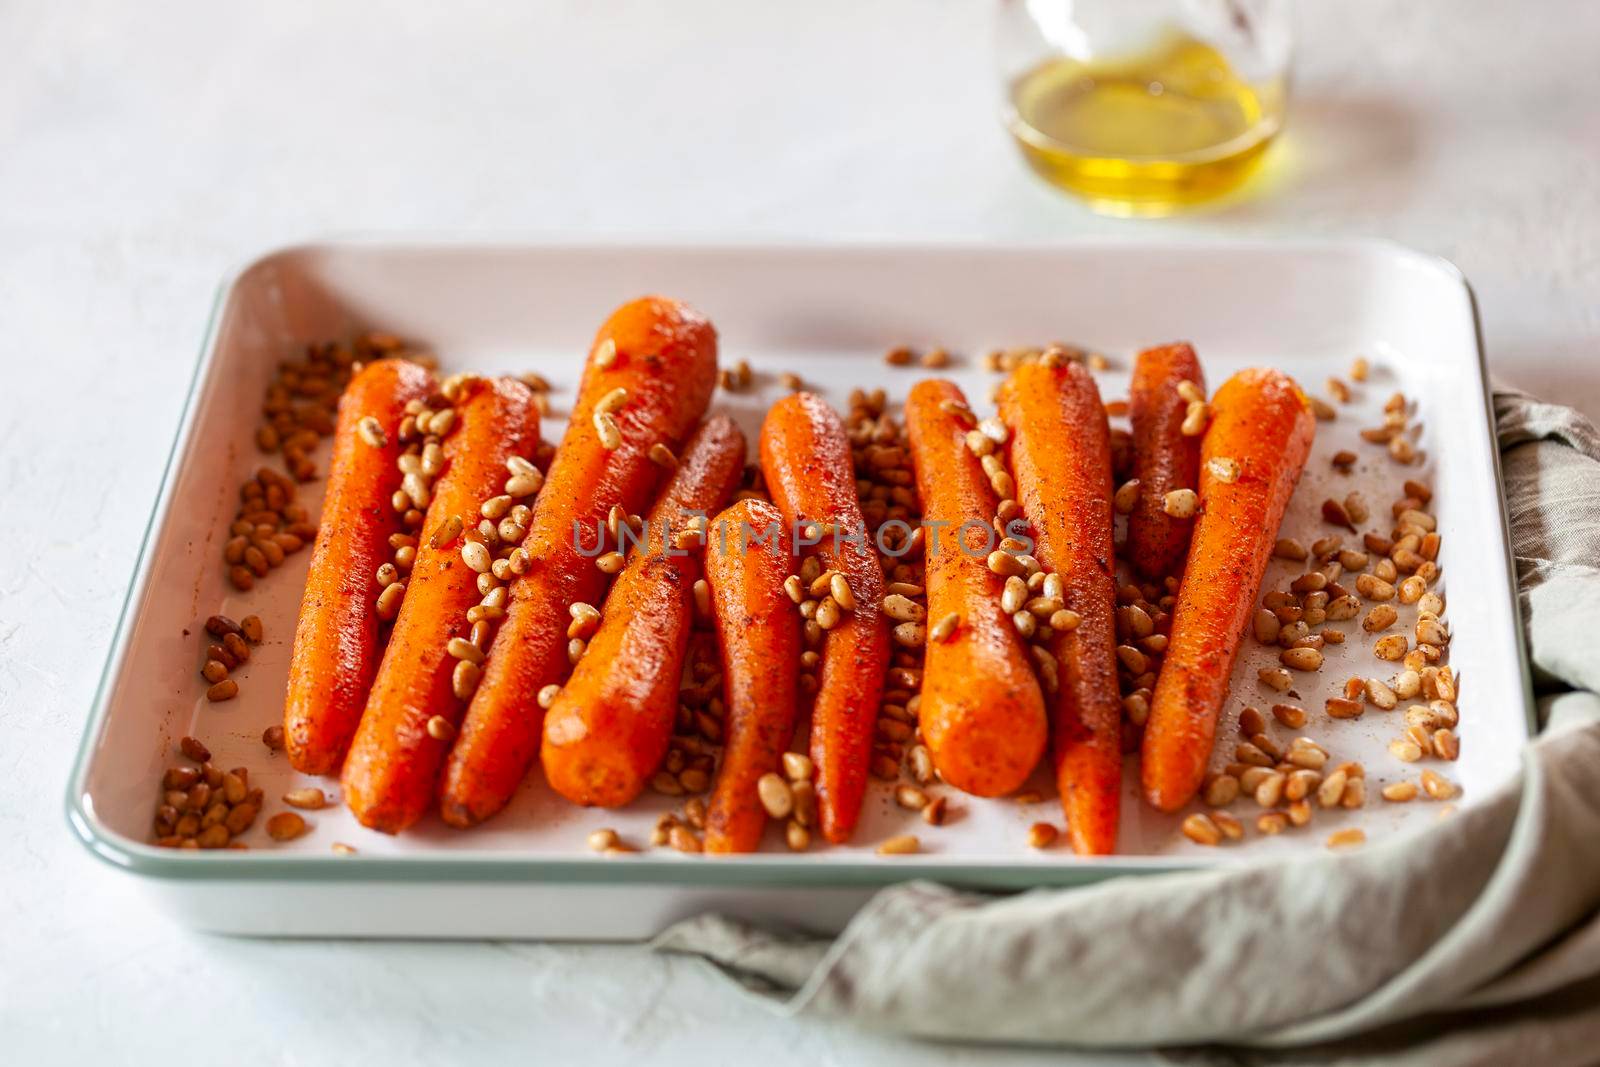 Lebanese-style carrots prepared with pine nuts and cumin